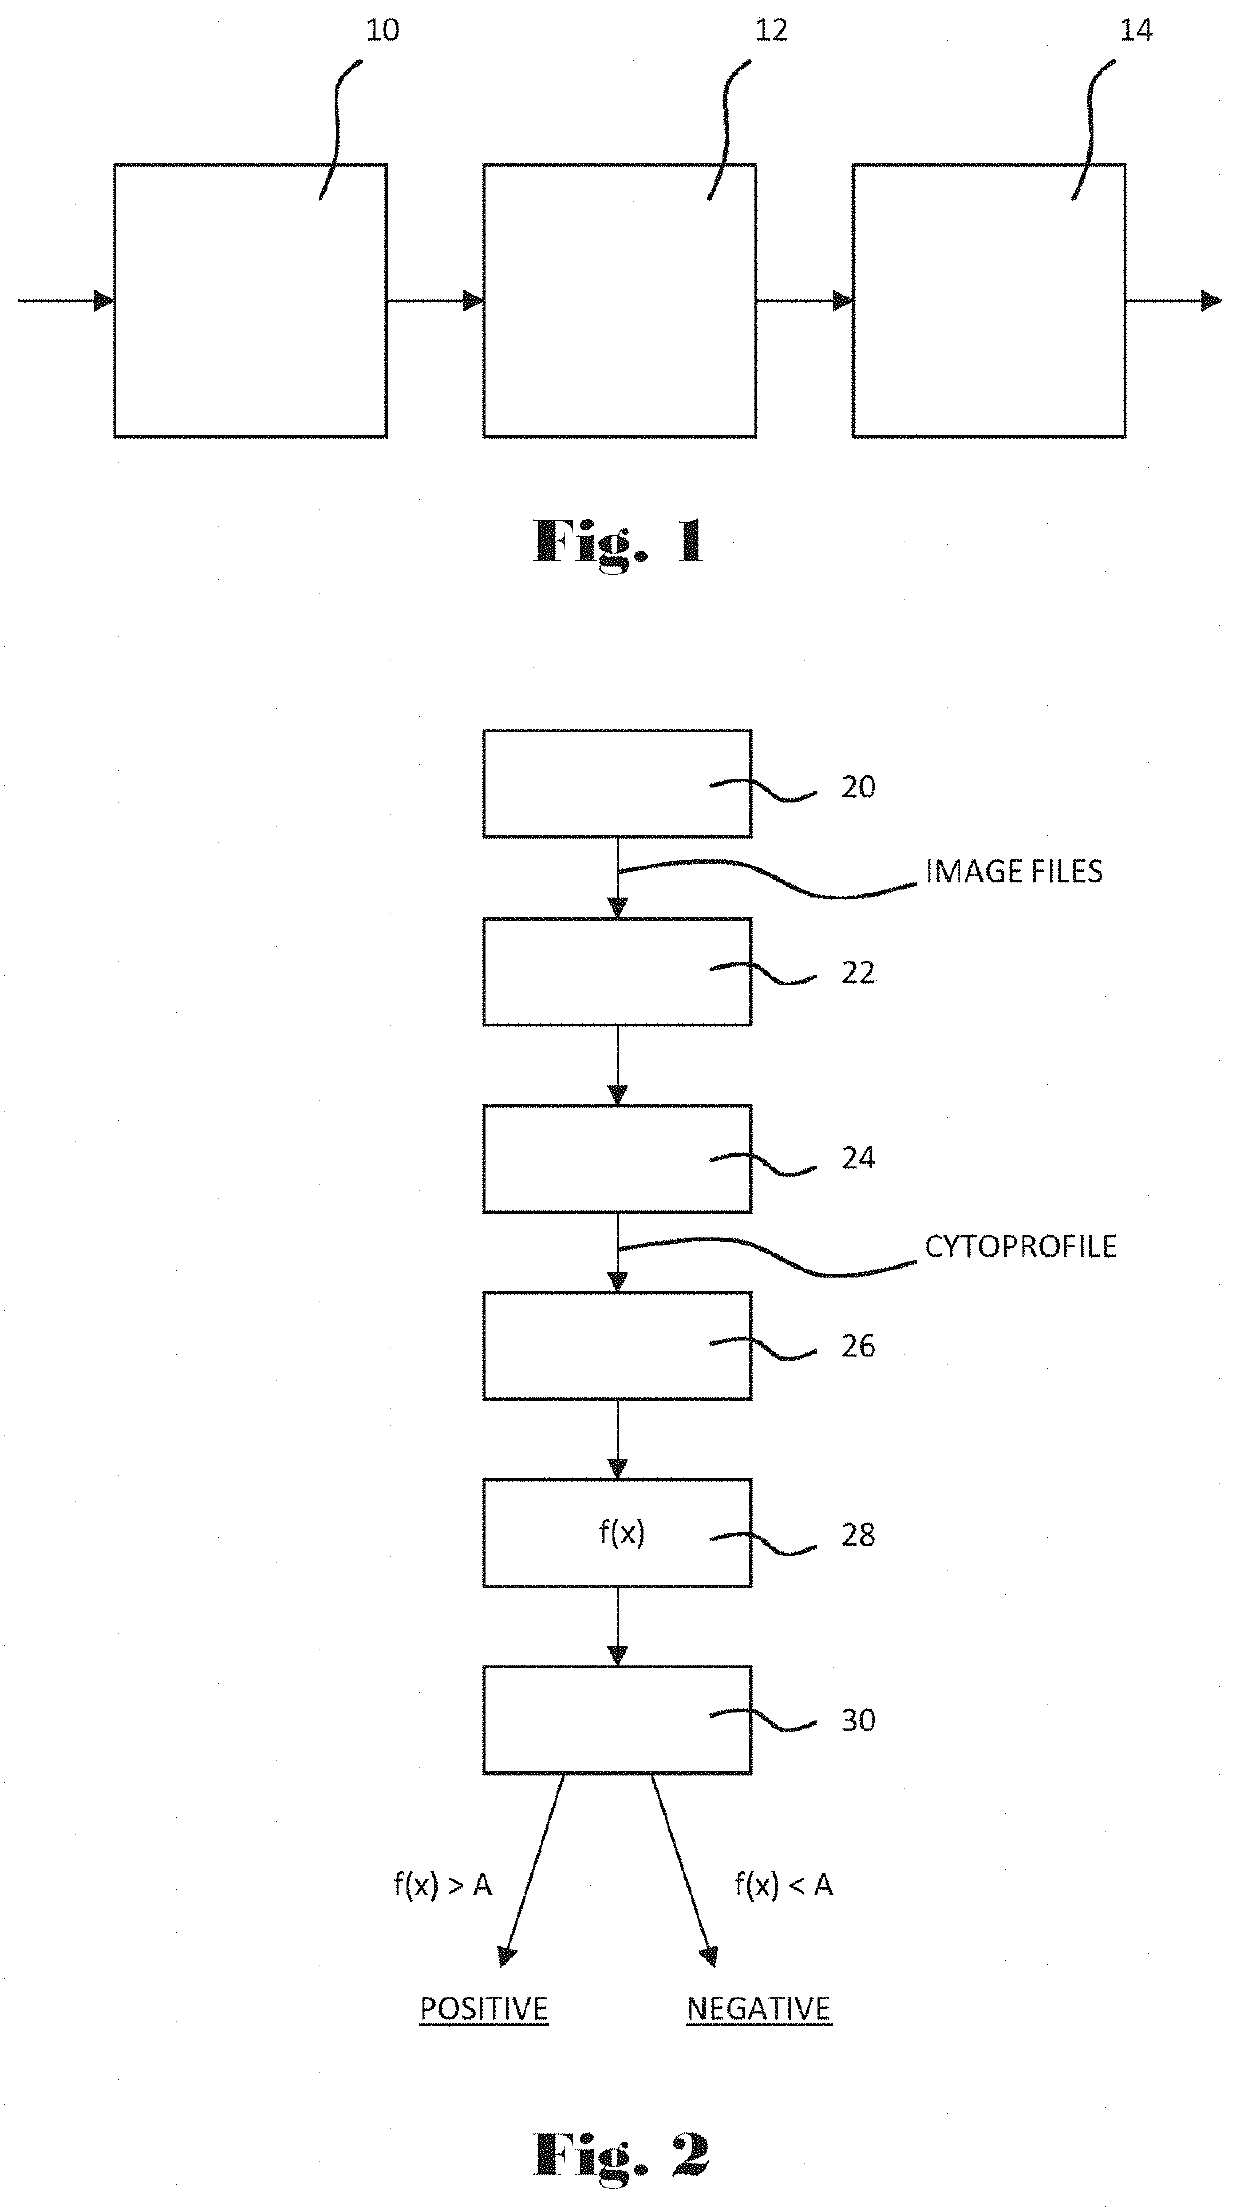 Computer-implemented apparatus and method for performing a genetic toxicity assay